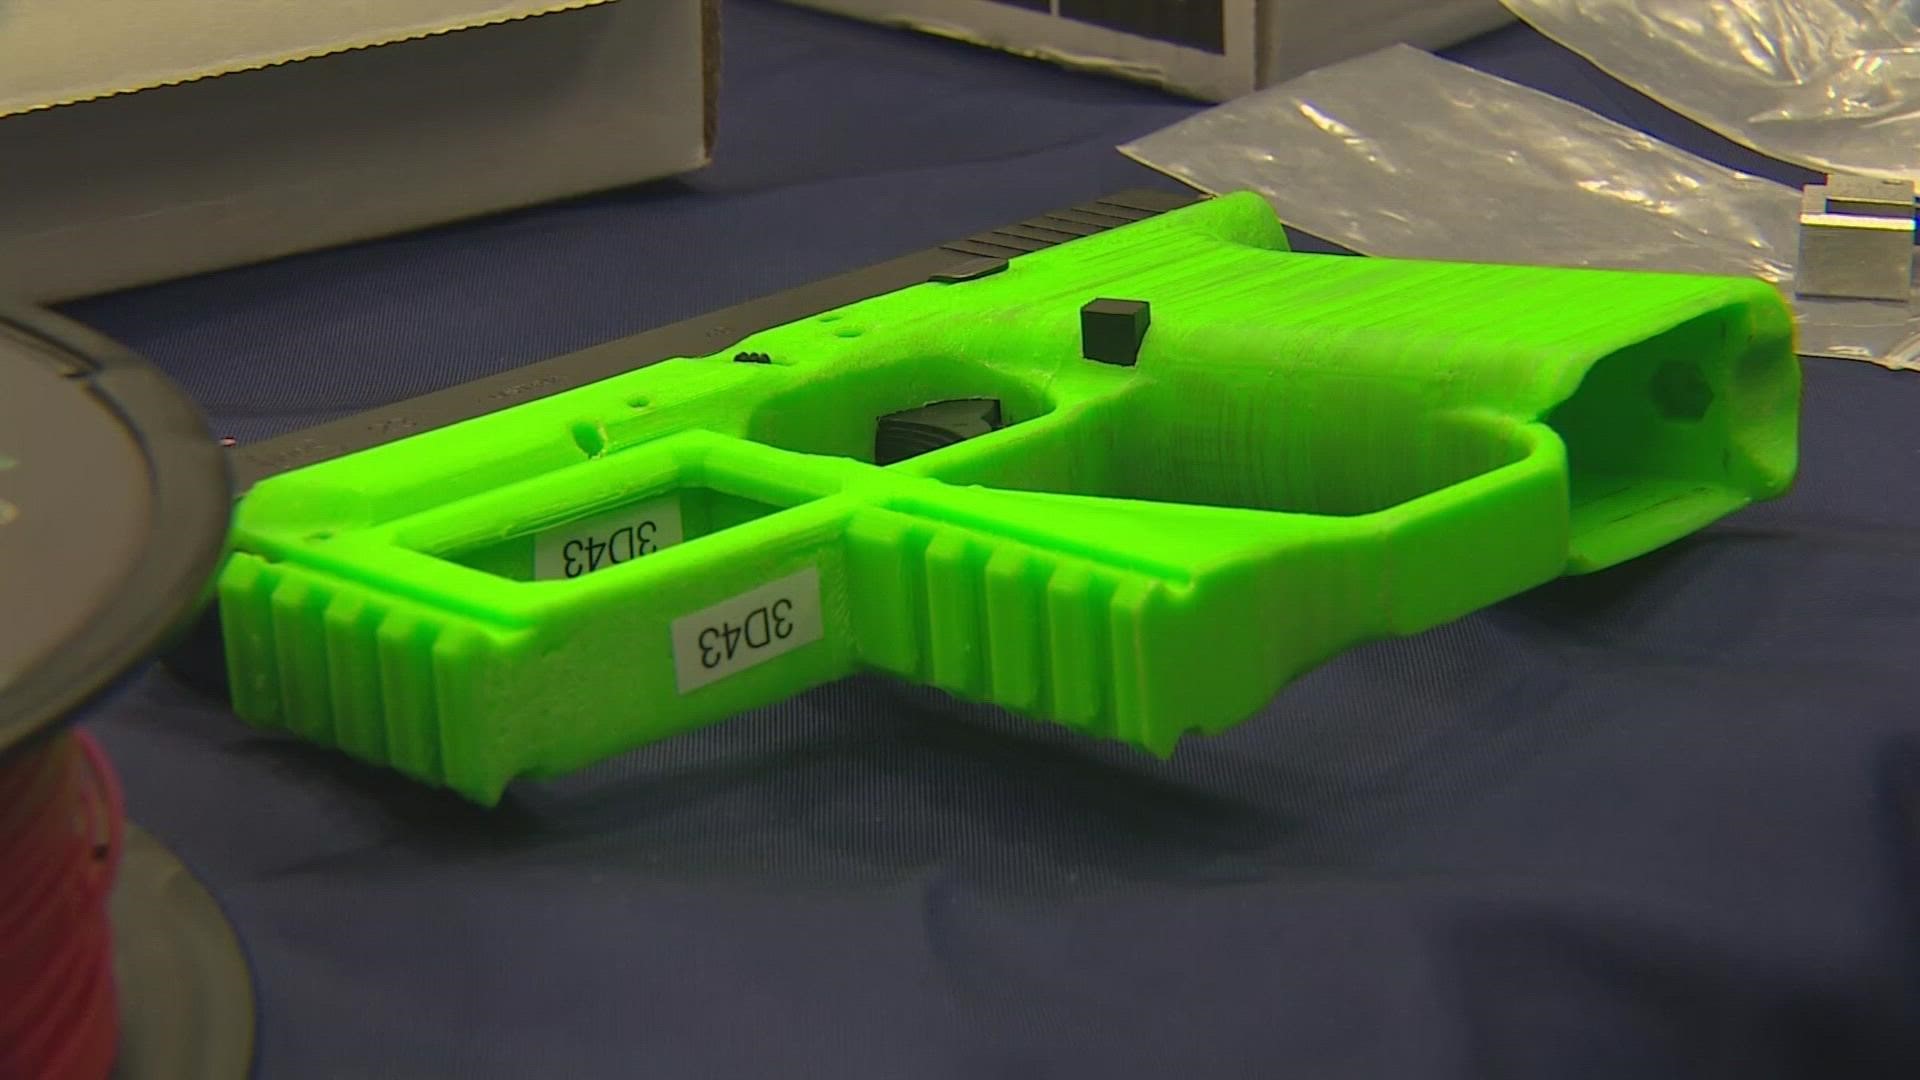 “Innovation in firearms has gone wild," said ATF agent Earl Griffith who is training police on privately-made firearms through 3D printers. “It’s a game-changer."